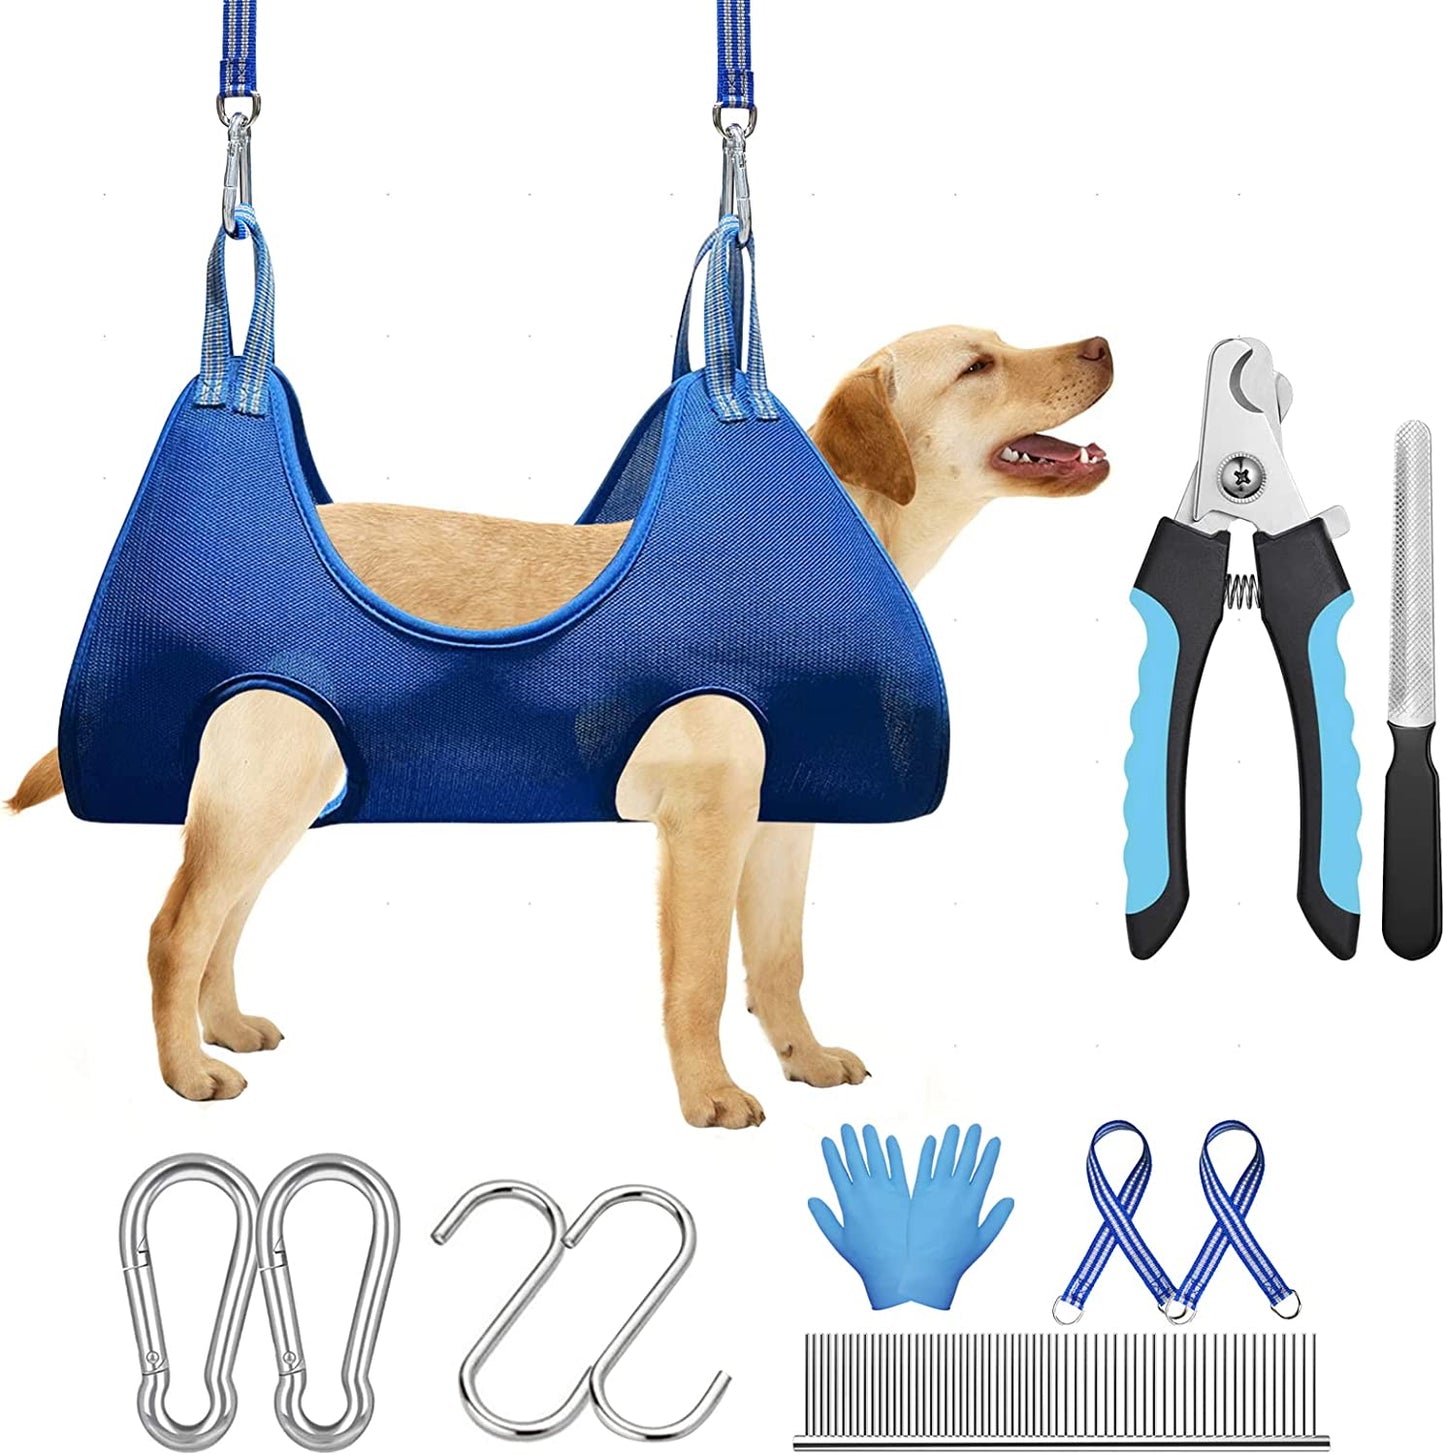 Pet Grooming Hammock Harness for Dogs & Cats,12 in 1 Breathable Dog Grooming Hammock for Bathing Washing Grooming and Clipping,Grooming Harness Bag with Nail Clipper/Nail File